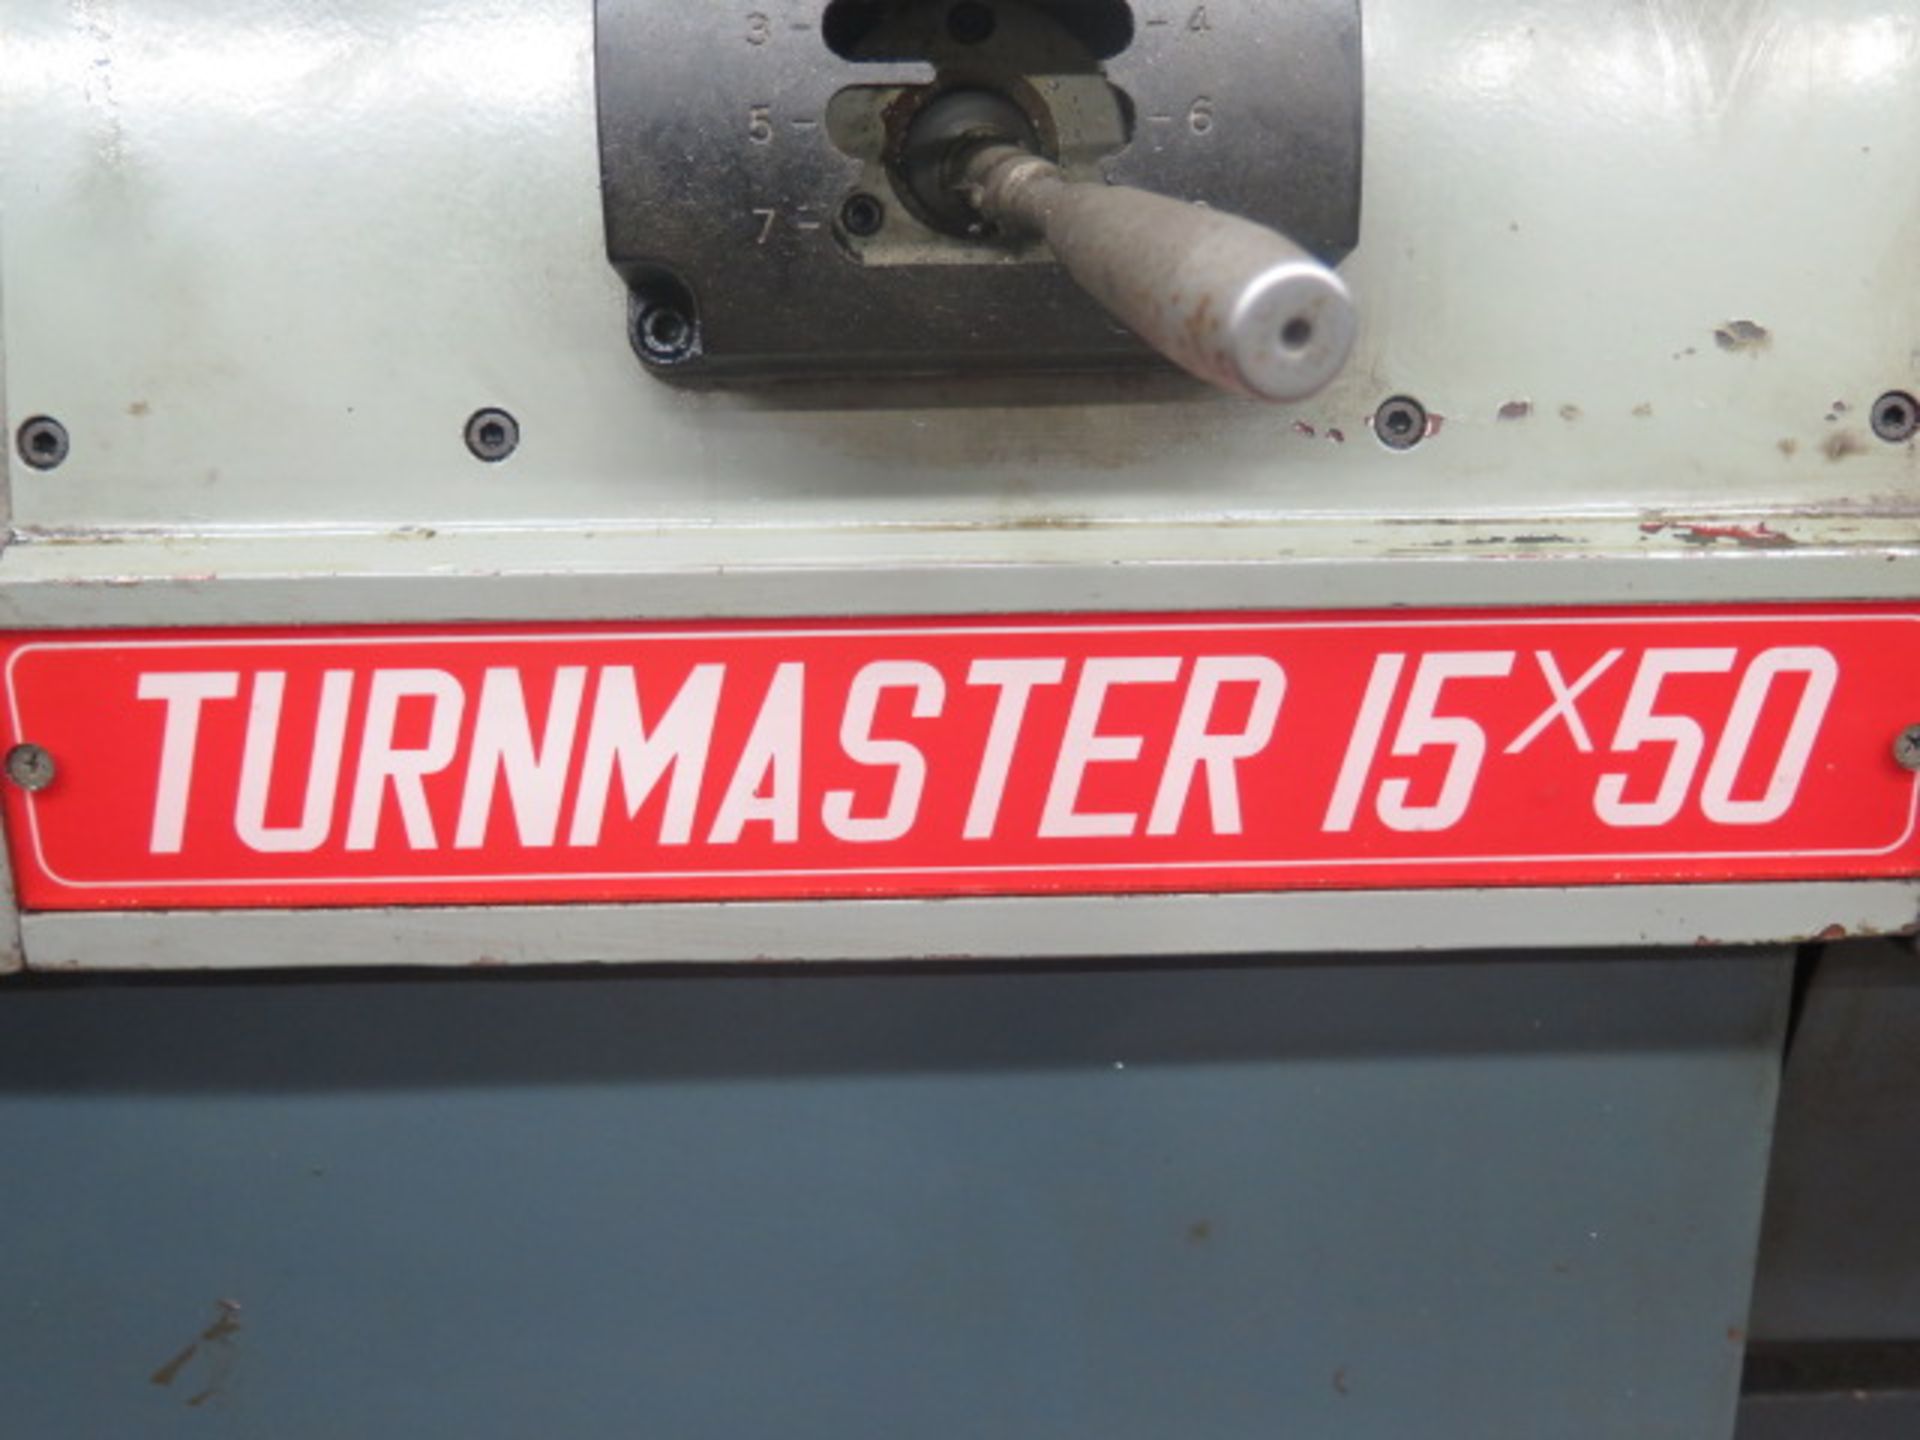 1996 American Turnmaster mdl. THL-1550 15” x 50” Geared Head Gap Bed Lathe s/n 15596060720 w/ 25- - Image 9 of 10